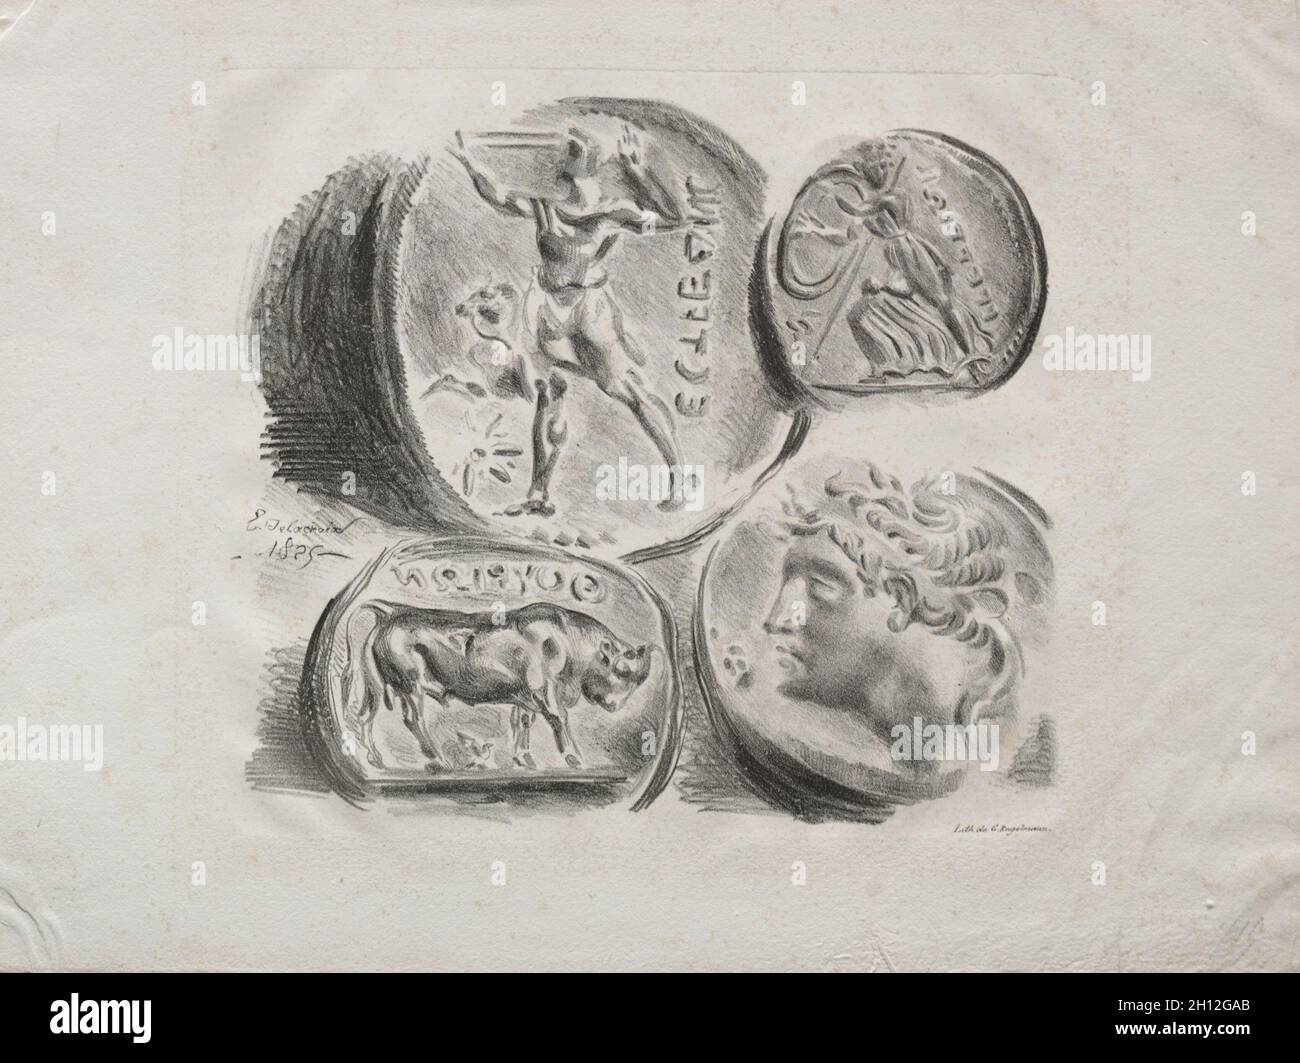 Sheet of Four Antique Medals, 1825. Eugène Delacroix (French, 1798-1863). Lithograph; sheet: 23.5 x 31.4 cm (9 1/4 x 12 3/8 in.); image: 17.2 x 19.4 cm (6 3/4 x 7 5/8 in.). Stock Photo